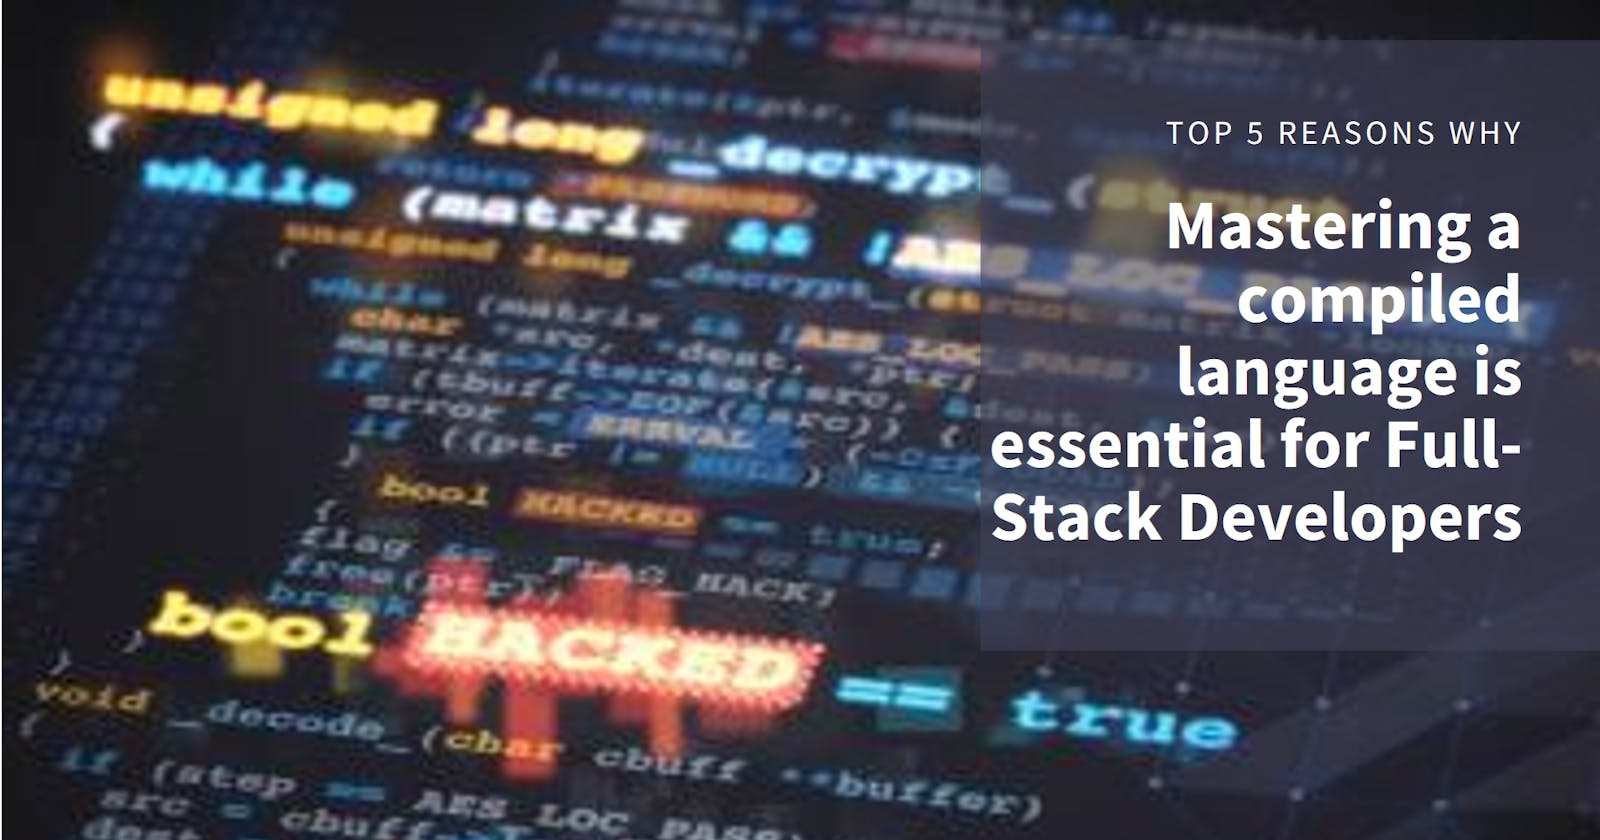 Top five reasons why mastering an compiled language (like Java) is essential to the Full-Stack Developer